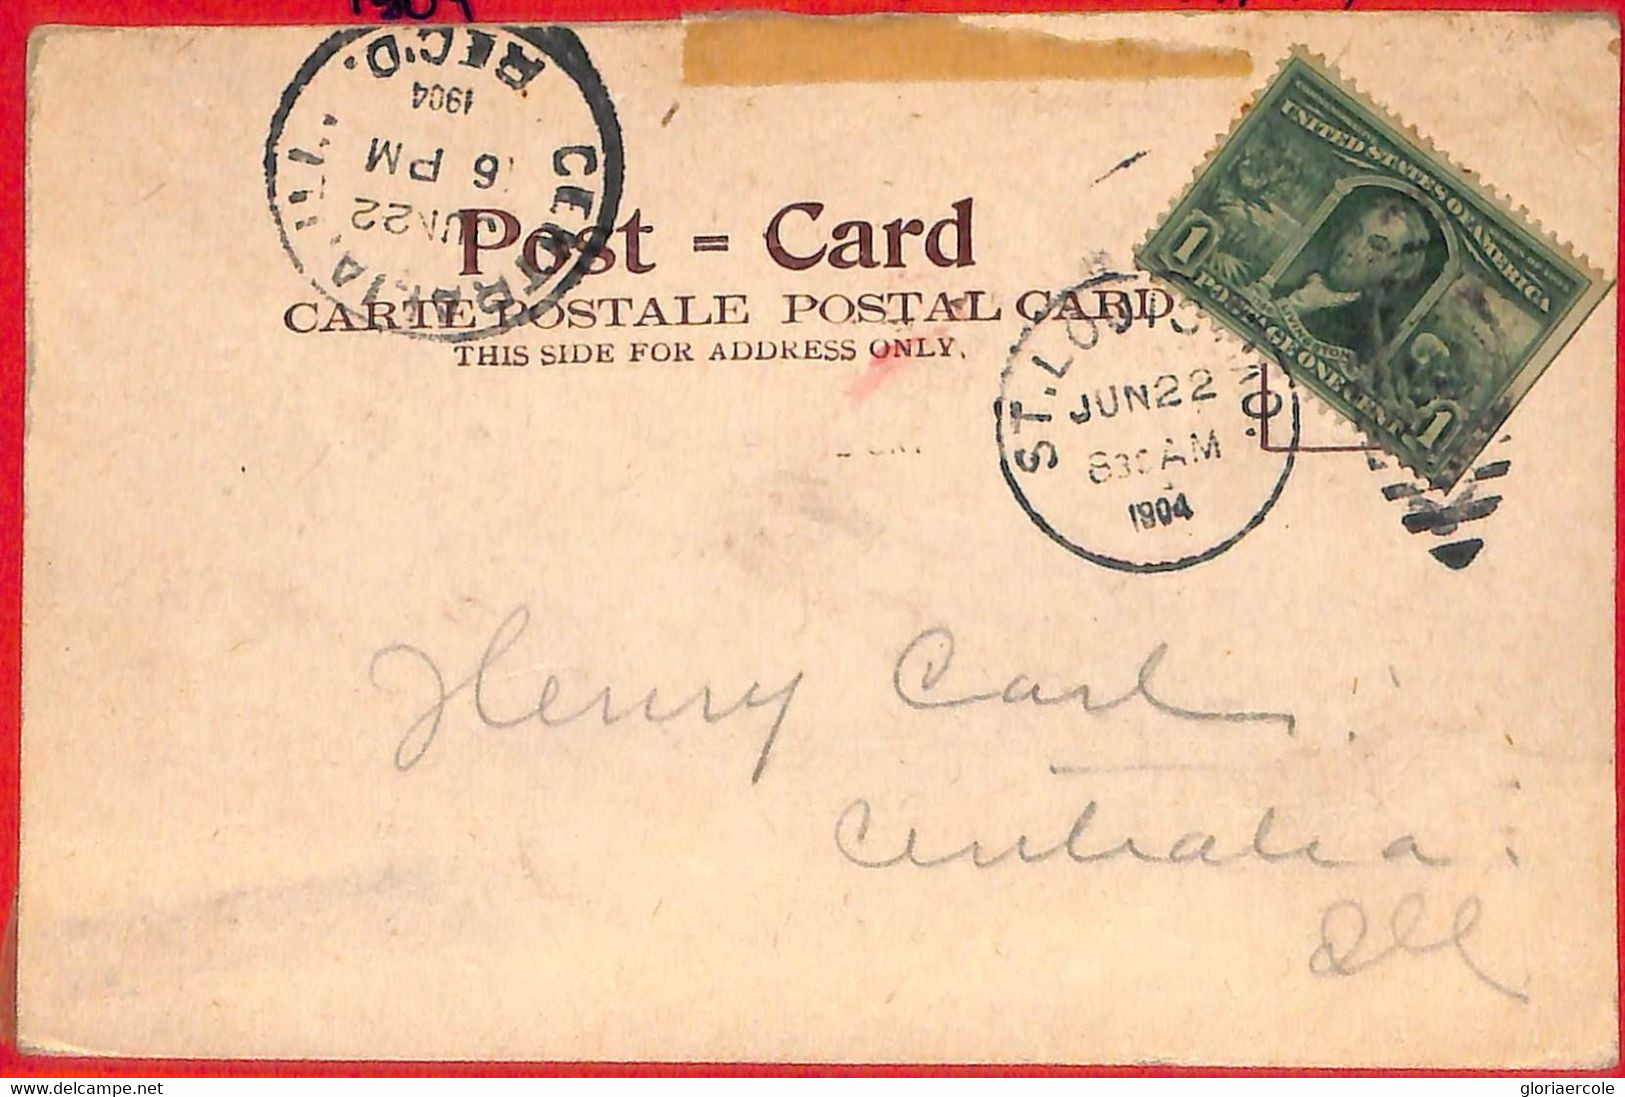 Aa2569 - USA - POSTAL HISTORY - CARD From ST LOUIS 9 Days B4 1904 Olympic Games - Zomer 1904: St. Louis